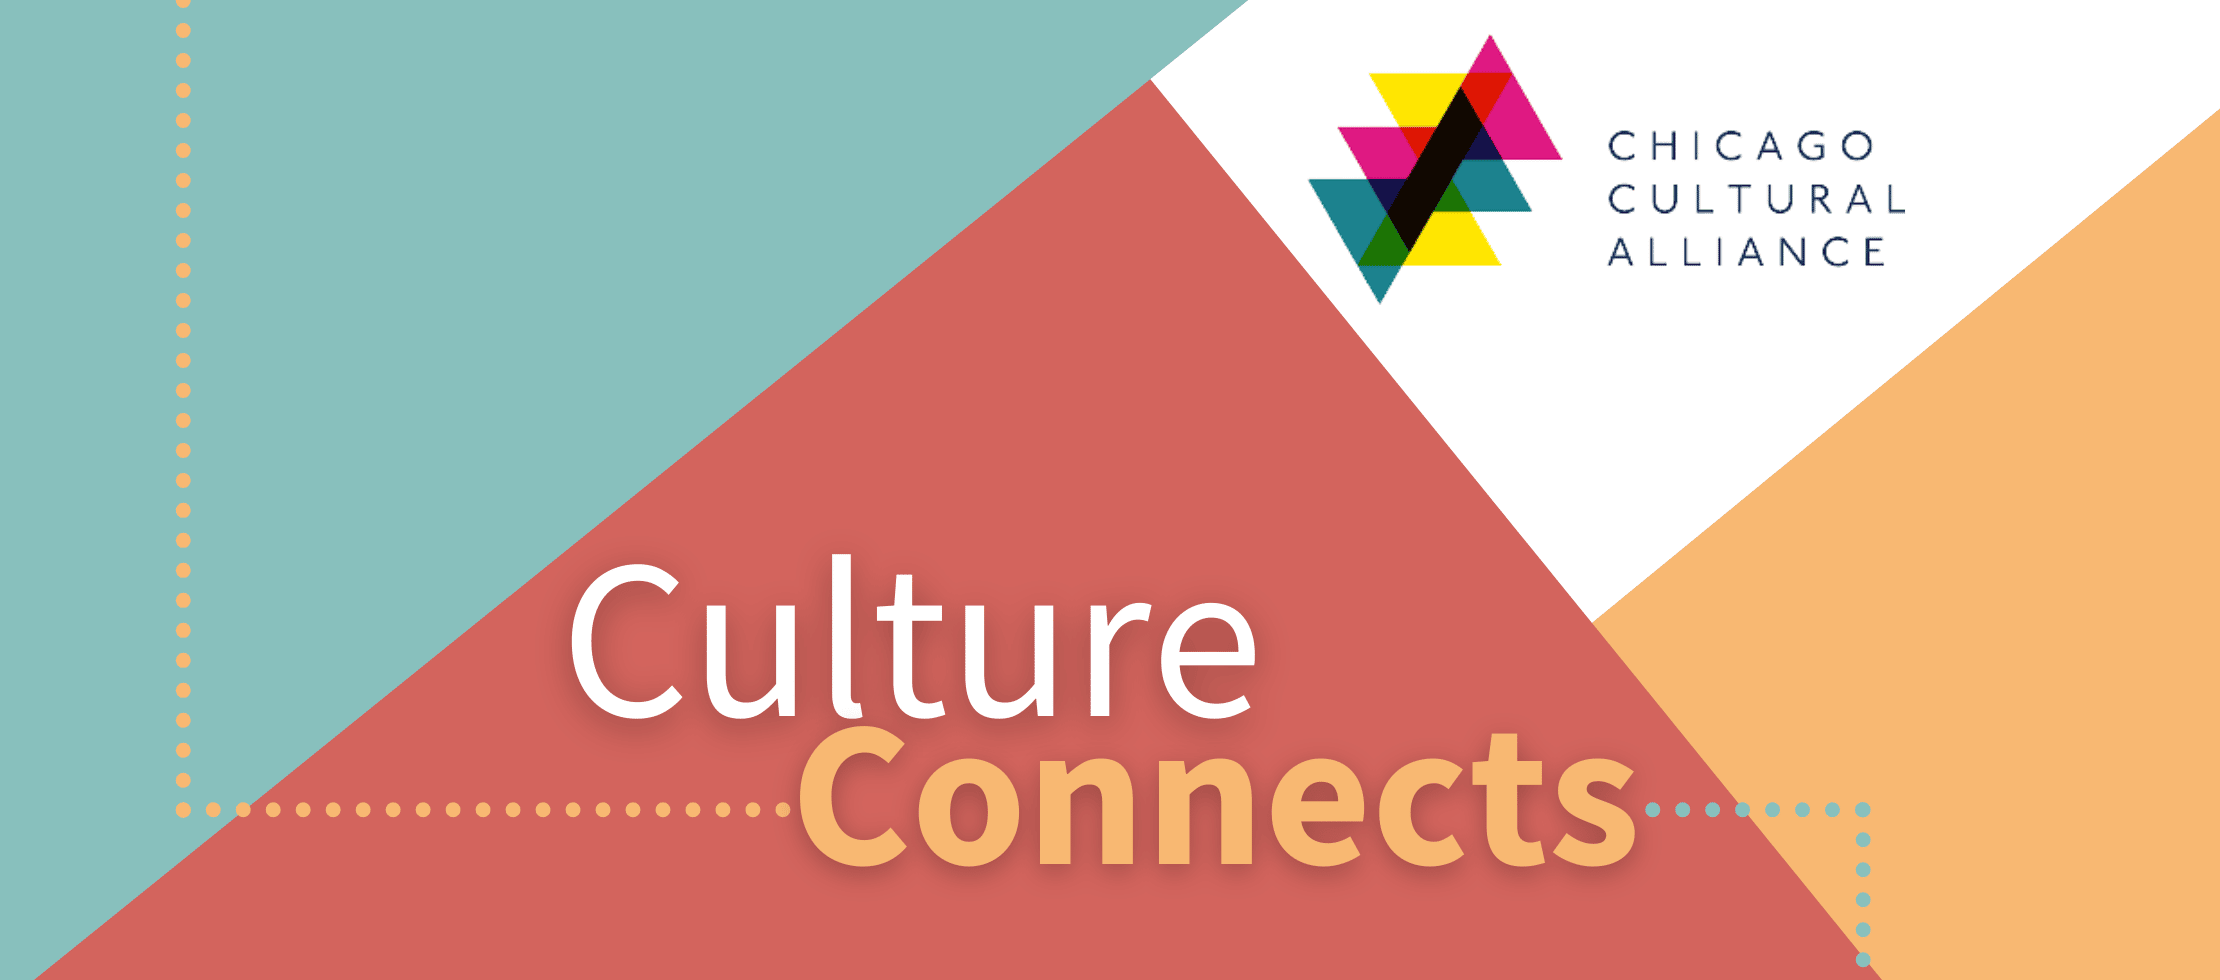 light blue, pink, and light yellow triangle with culture connects written at bottom and dotted lines connecting the words, chicago cultural alliance logo on top right